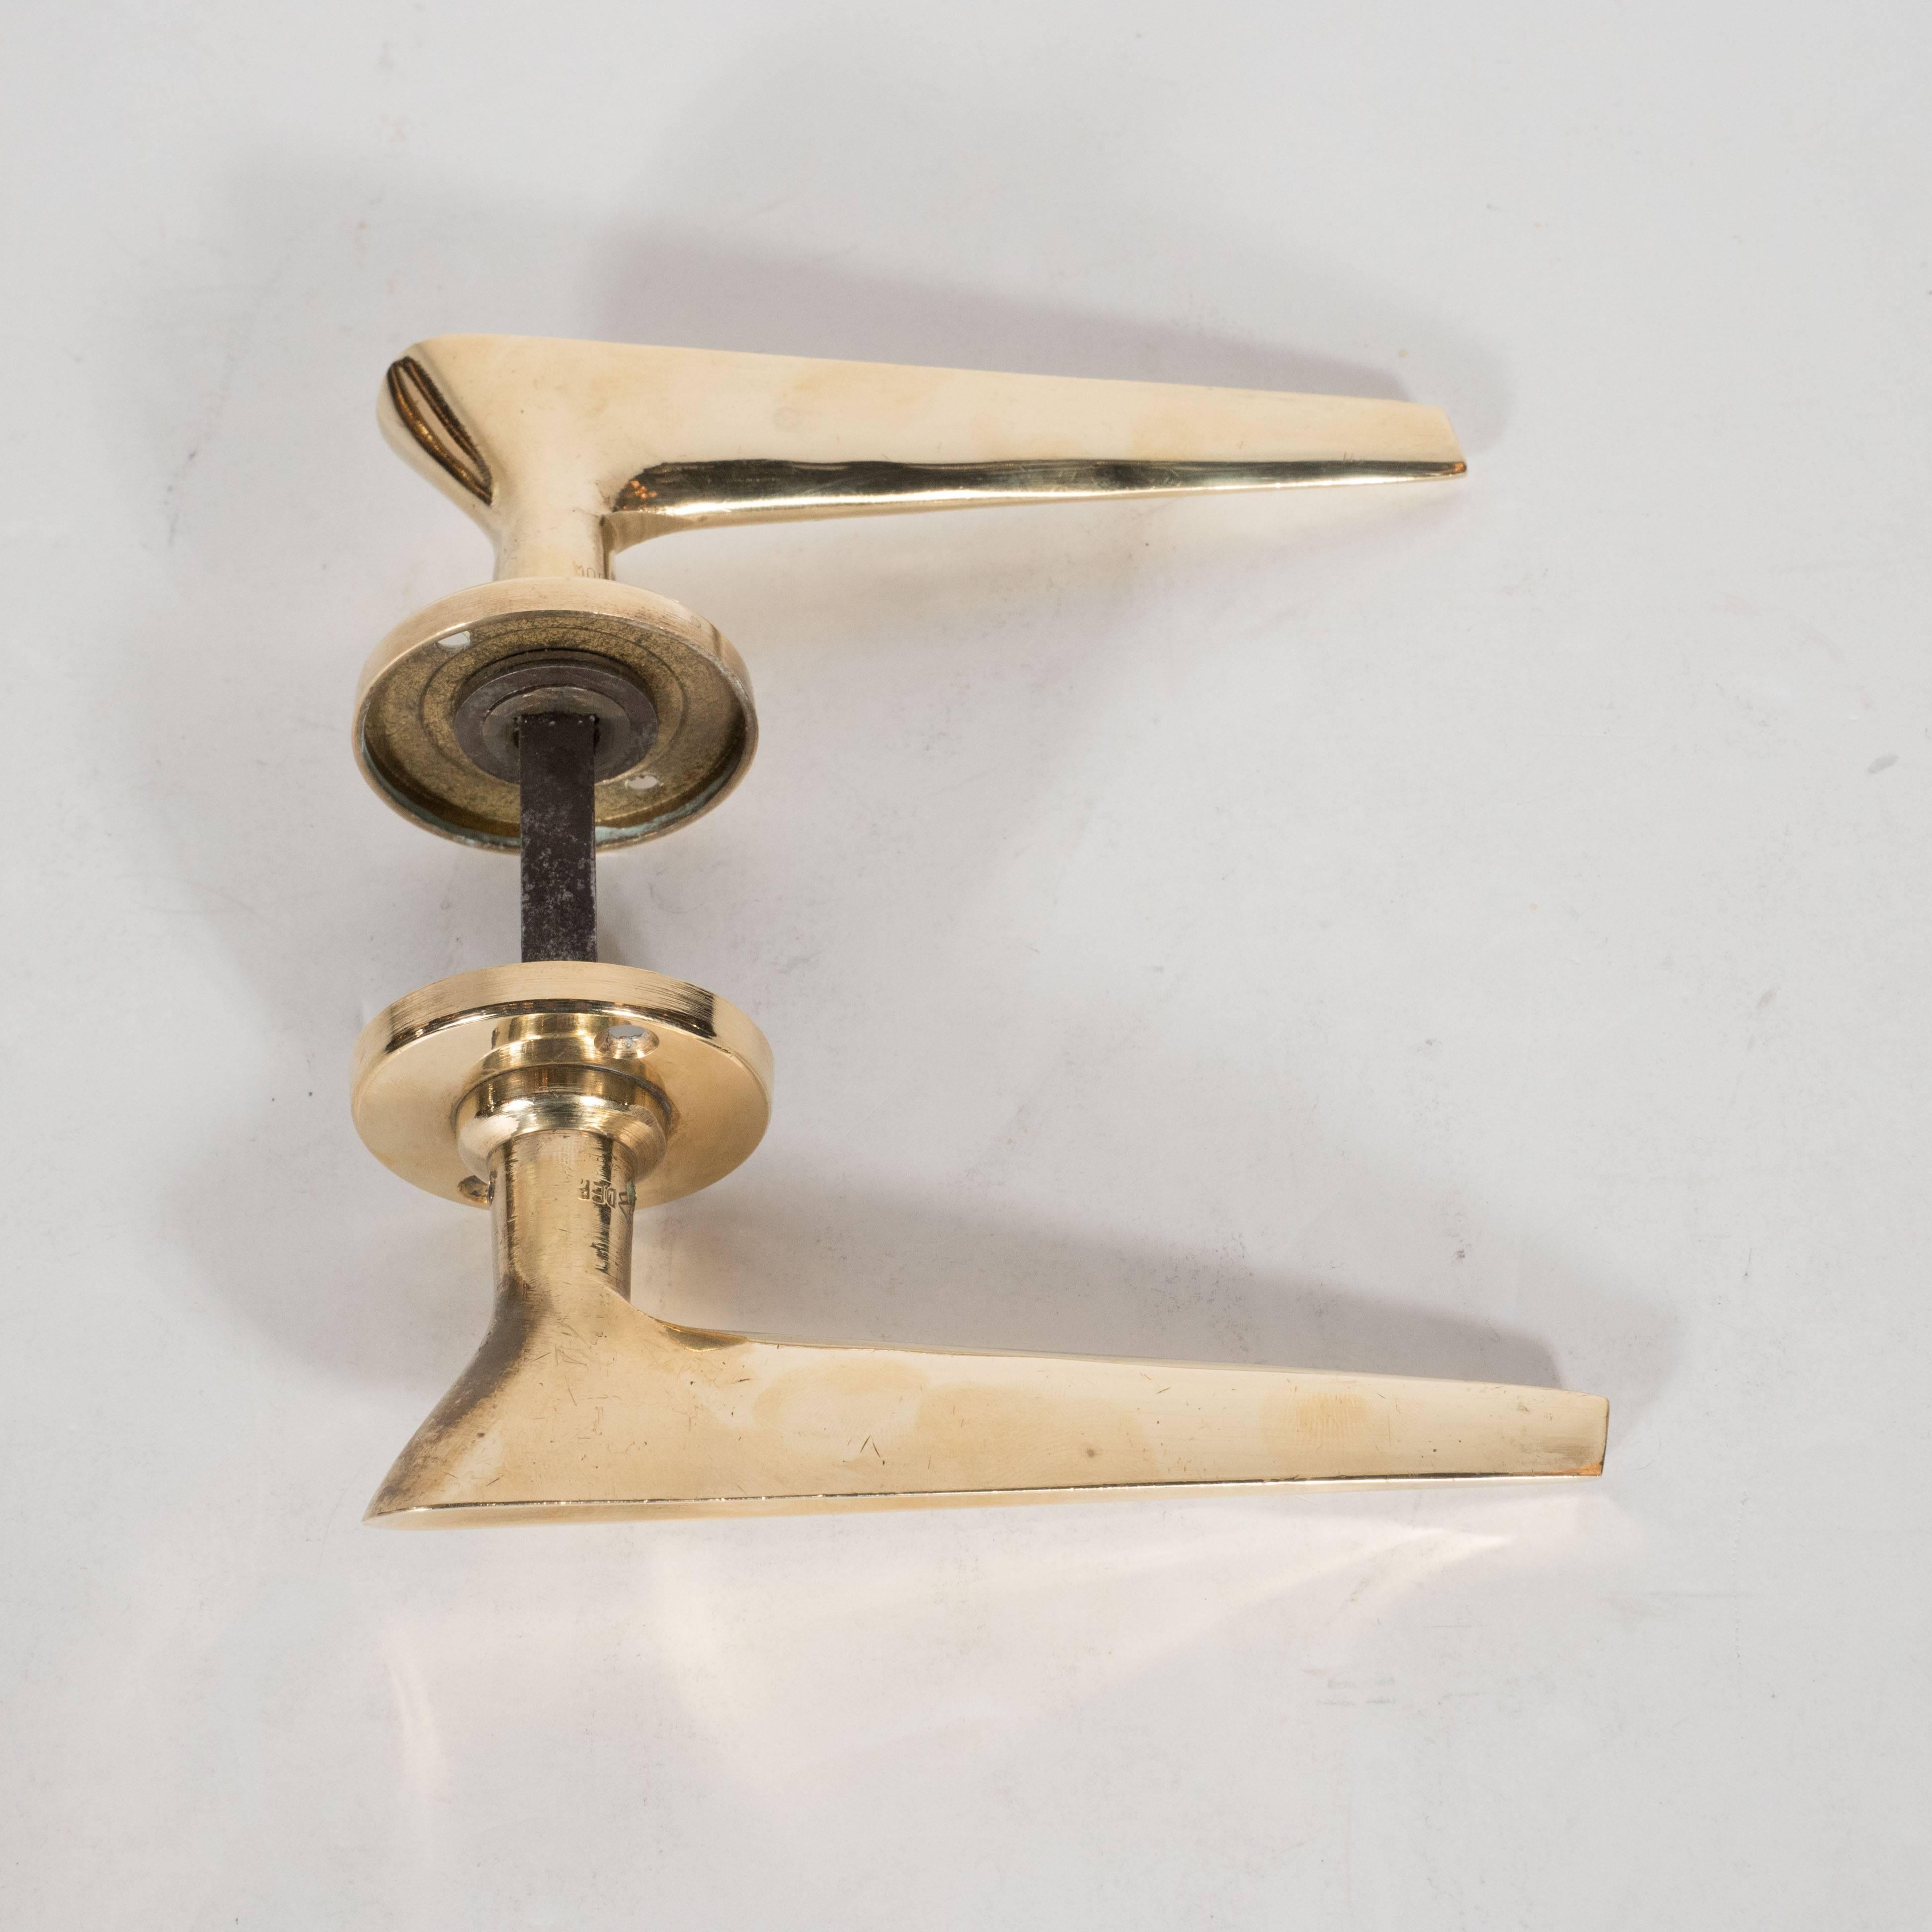 Italian Seven Mid-Century Modern Polished Brass Door Handles in the Manner of Gio Ponti